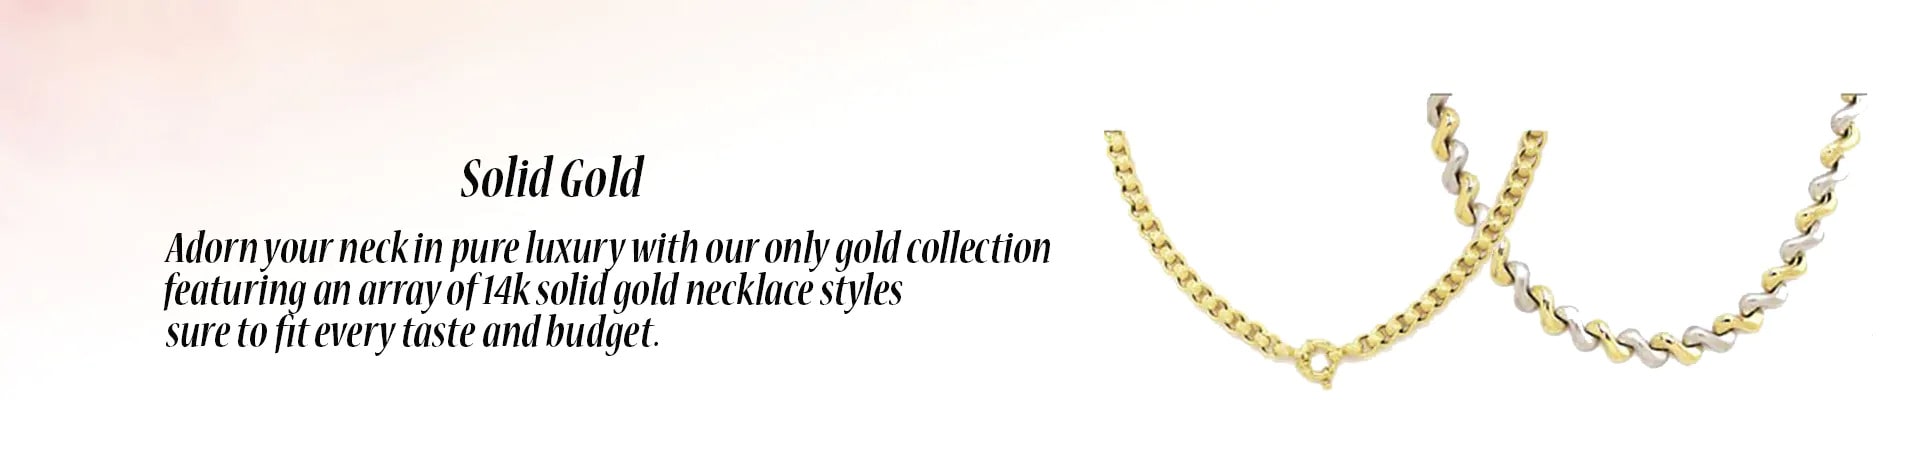 Solid Gold Necklaces